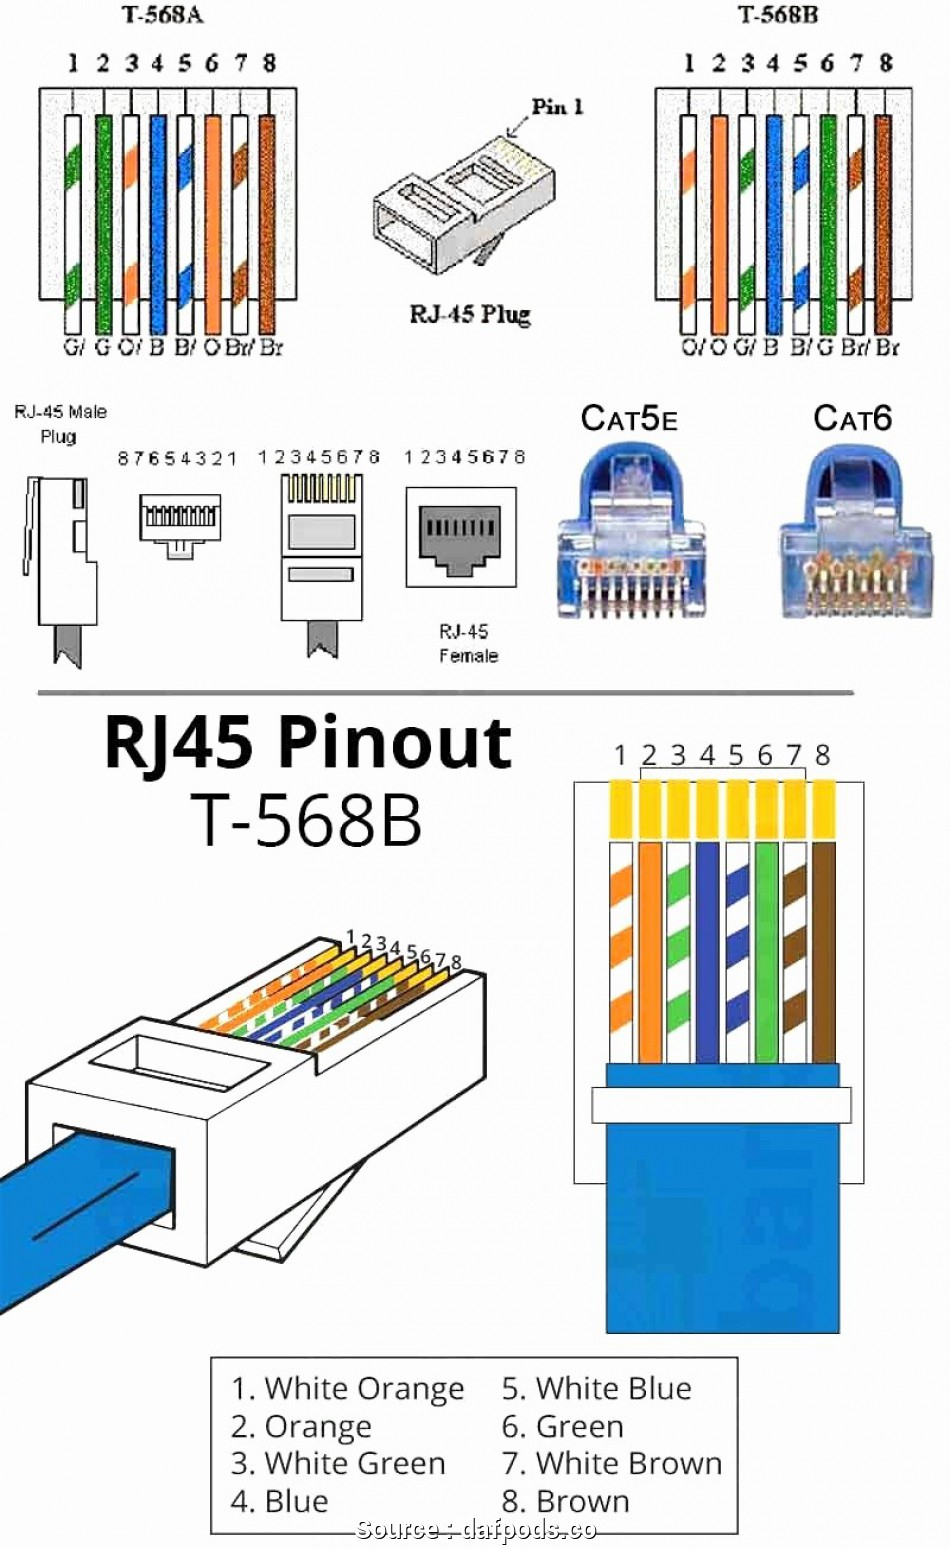 Cat 6 Cable Standard Wiring Diagram